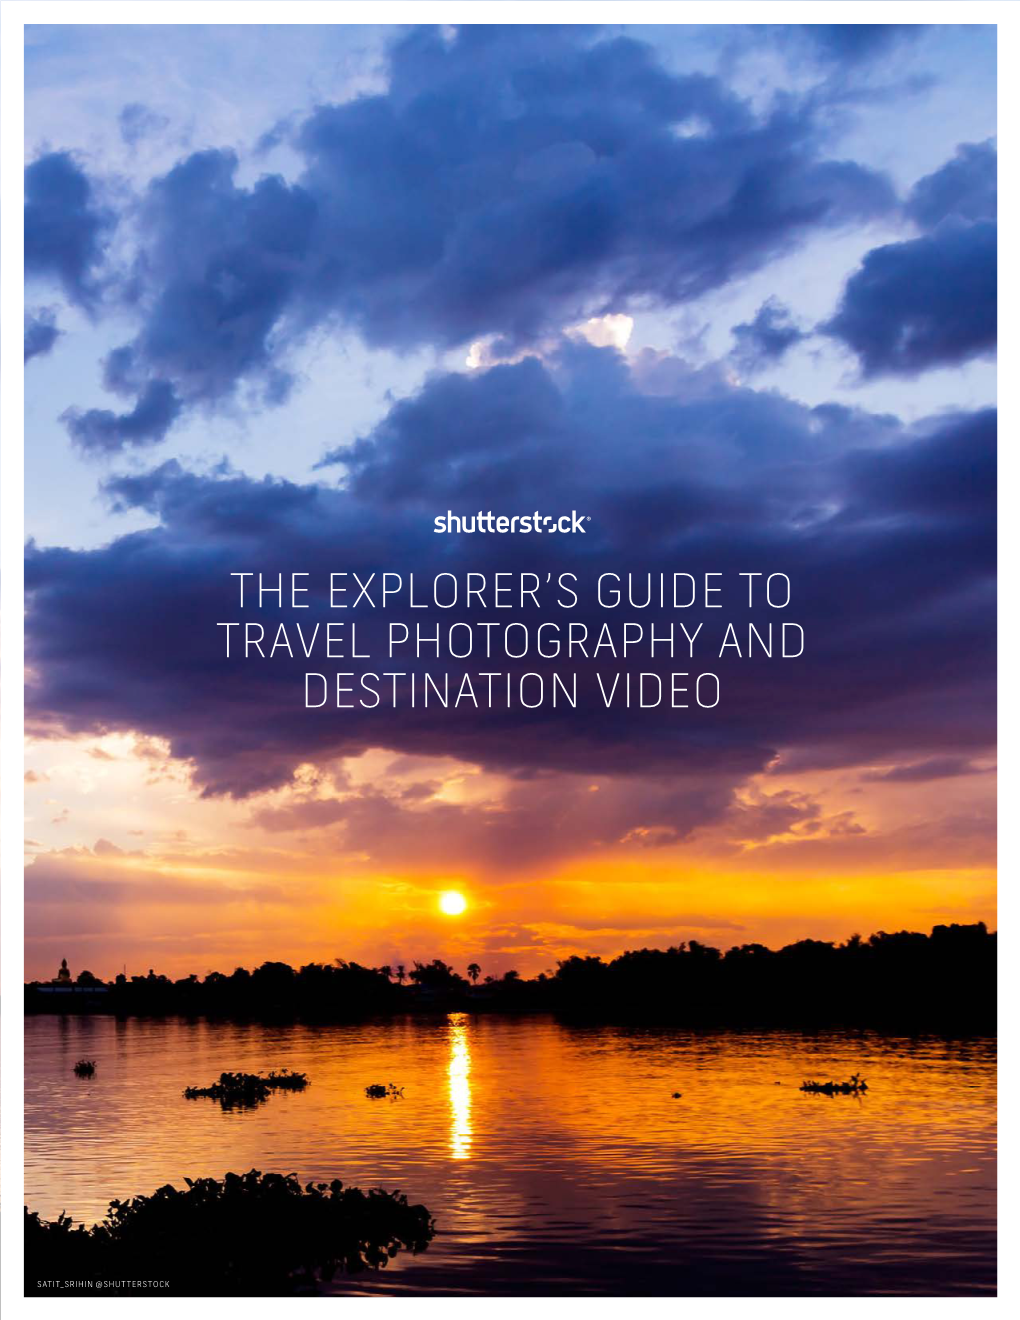 The Explorer's Guide to Travel Photography And